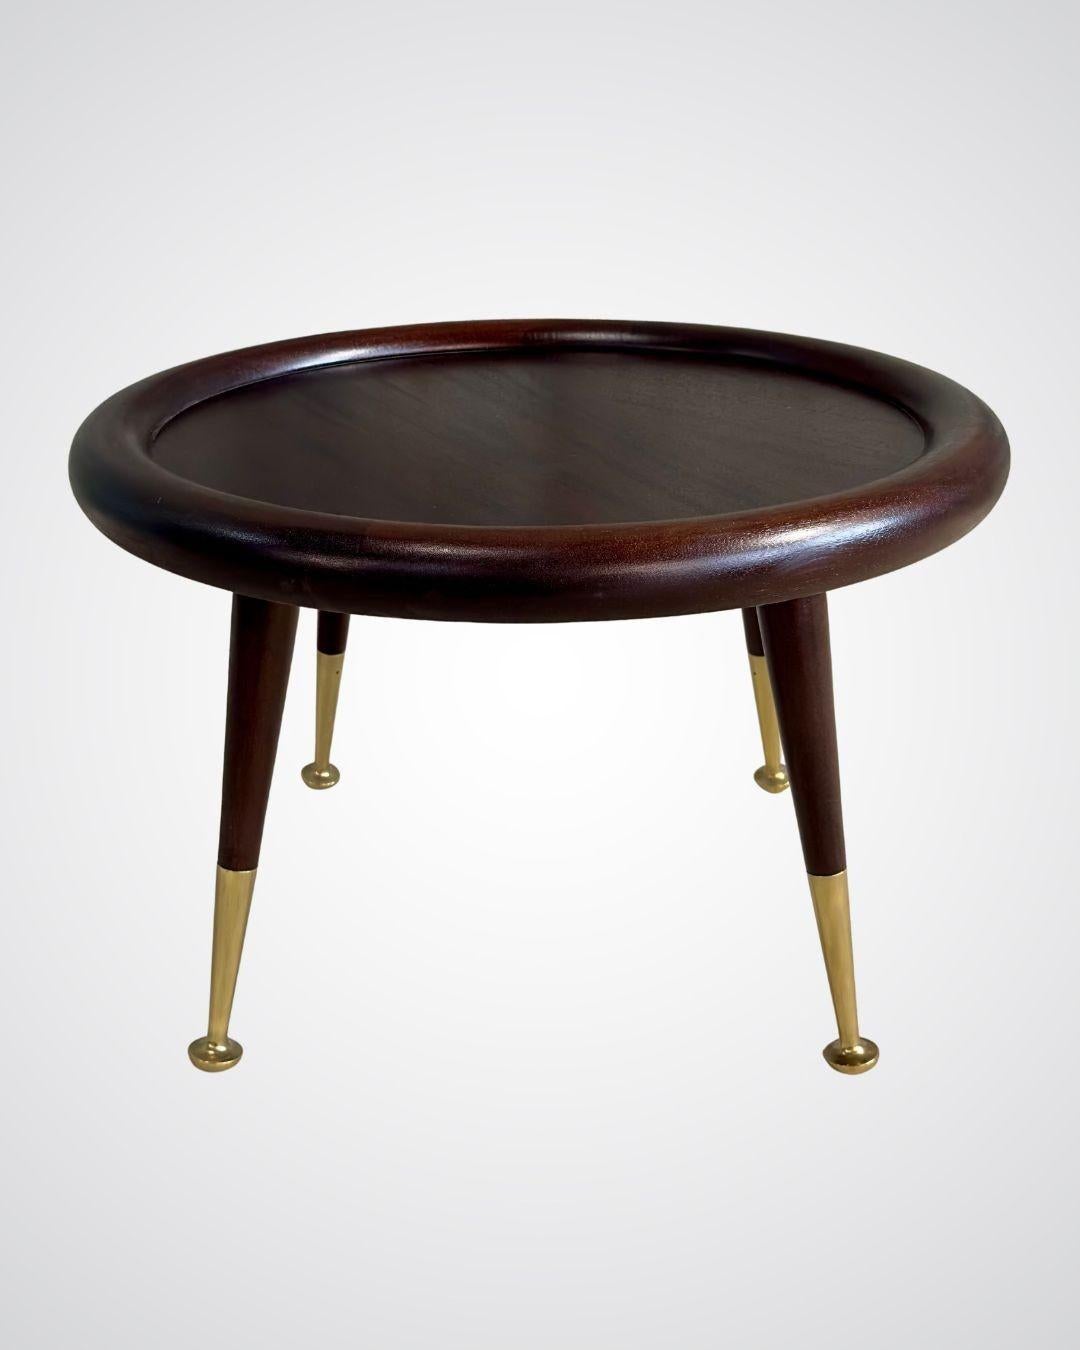 Round Mahogany Brass Side Table attributed to Robsjohn Gibbings, 1950.  Table has been completely restored.